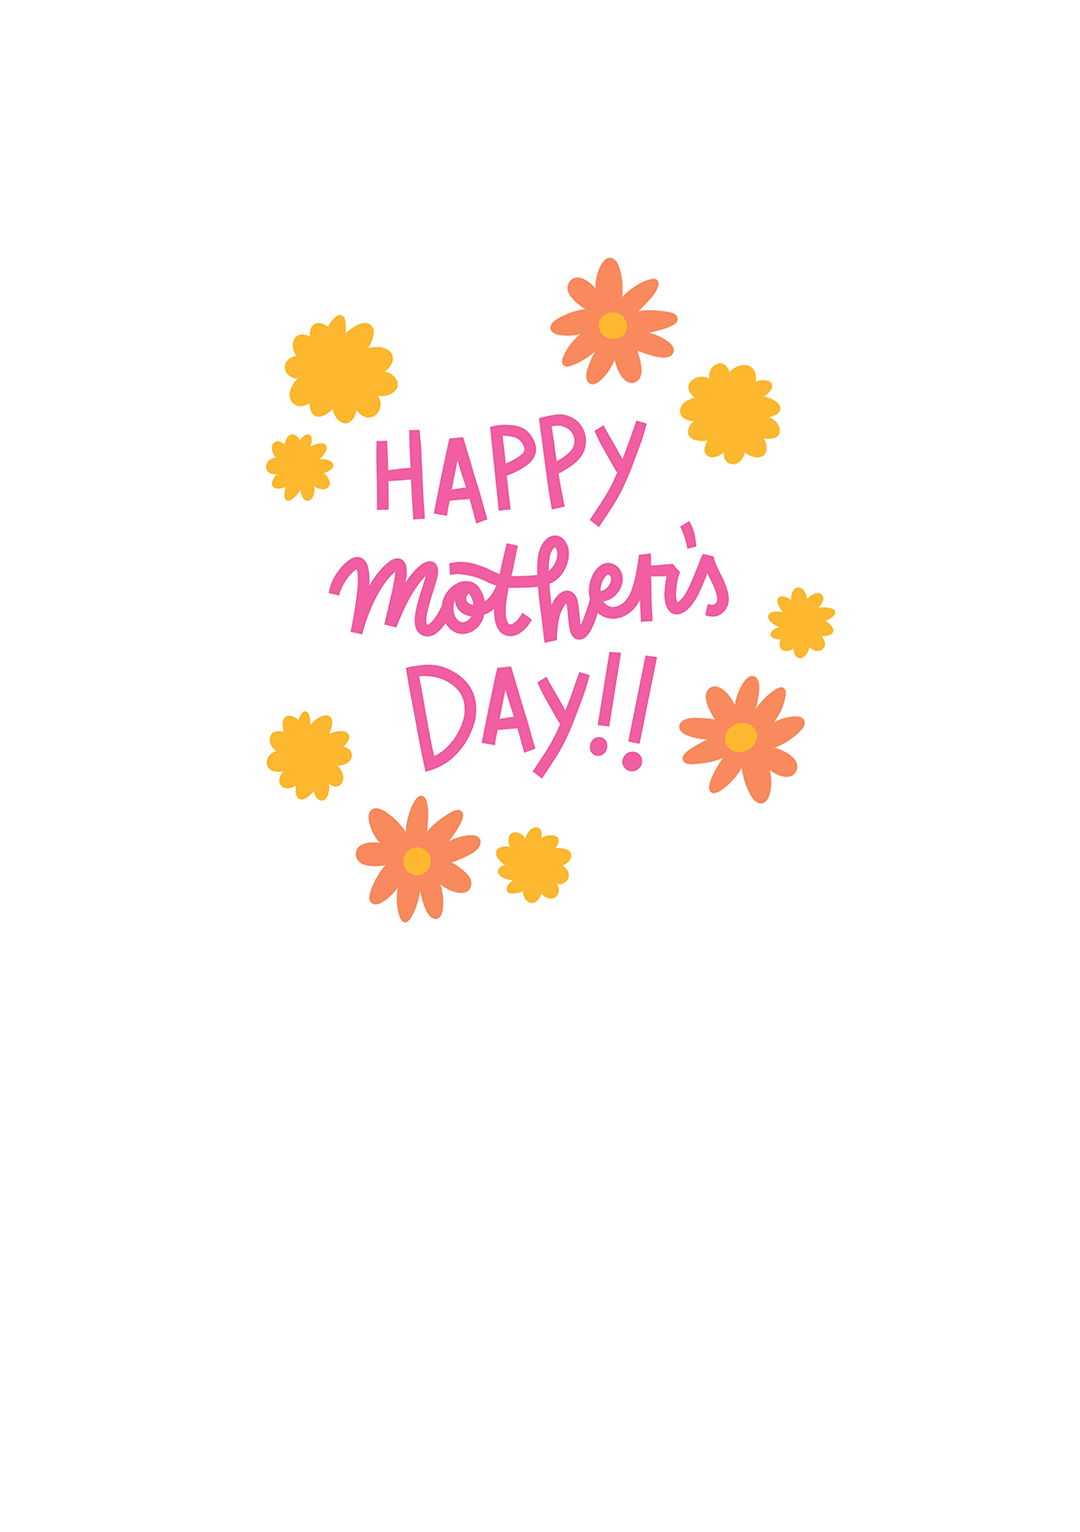 Happy Mother's Day Greetings Card